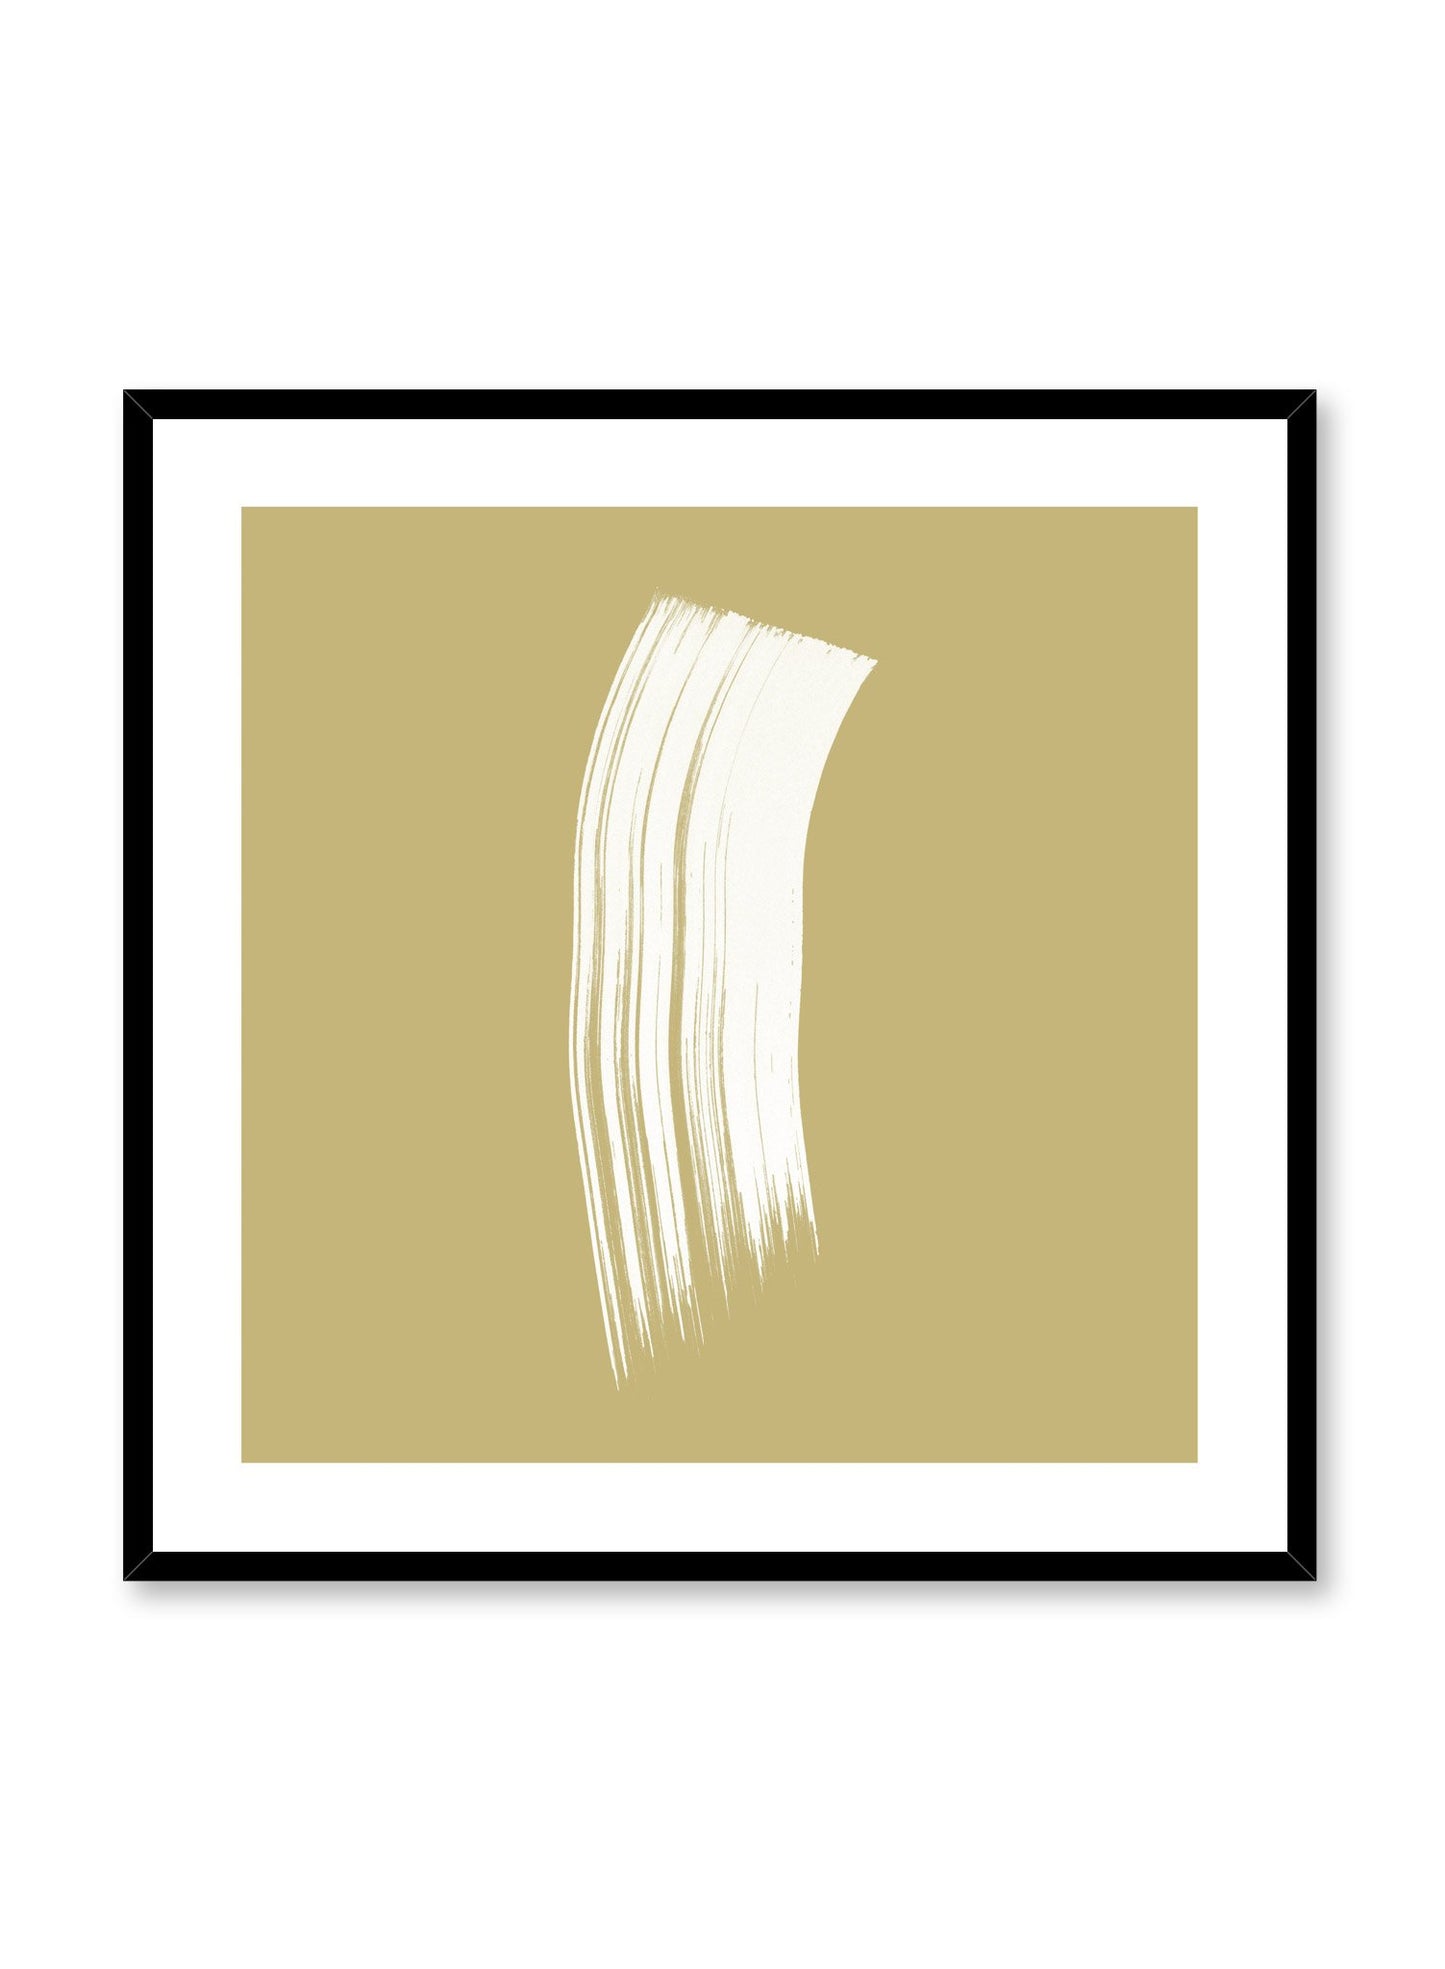 Modern minimalist poster by Opposite Wall with gold and white design in square format